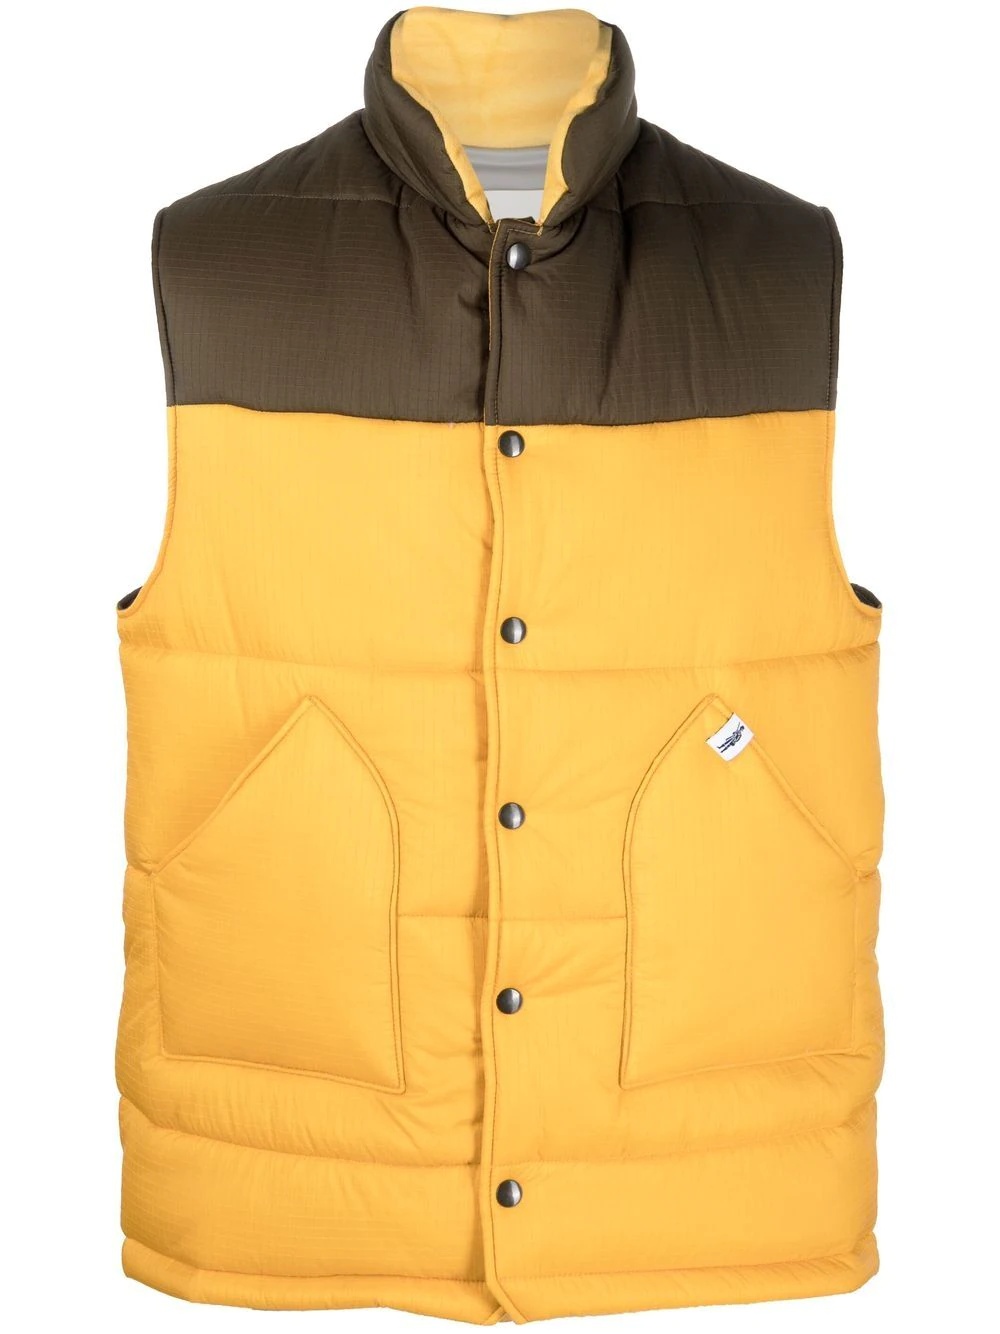 CONTRAST padded gilet - 1